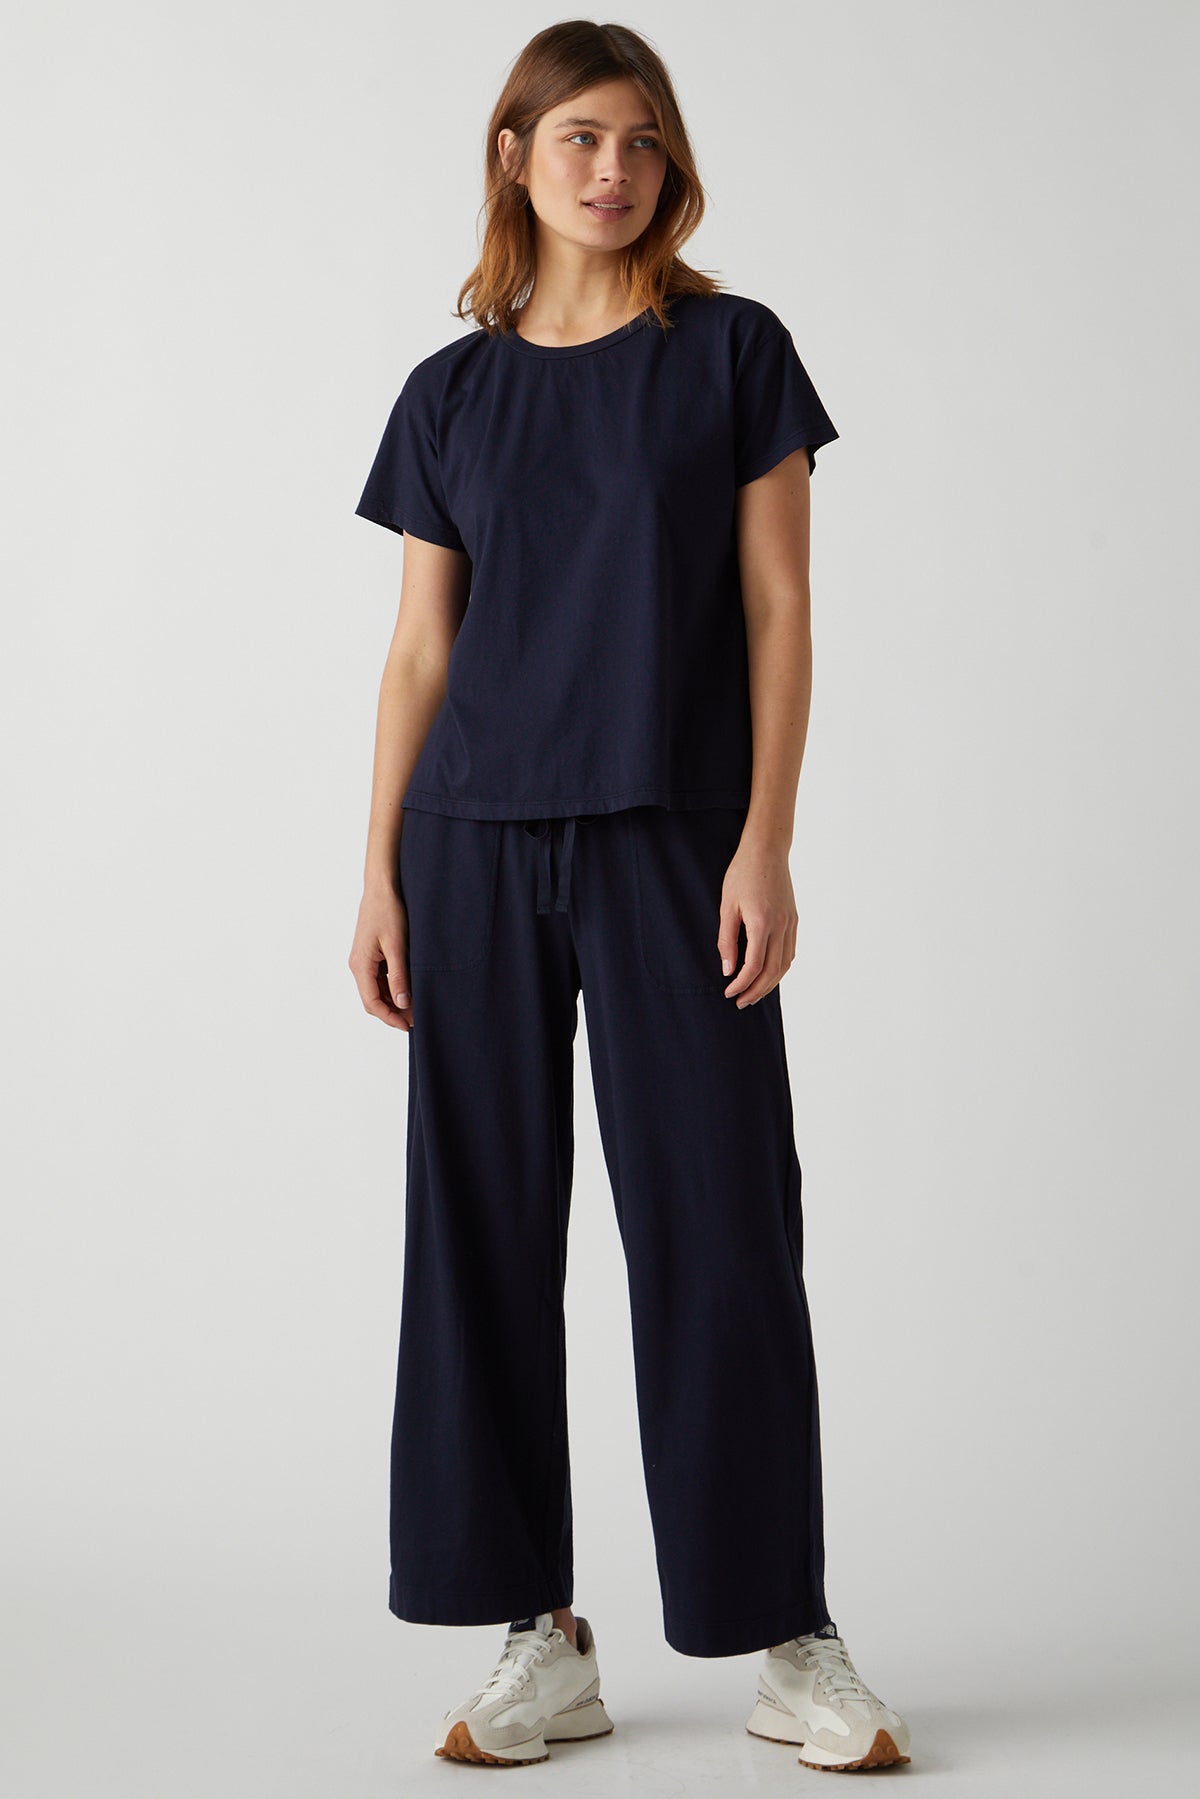 Pismo Pant in navy with Topanga Tee full length front-26040603771073